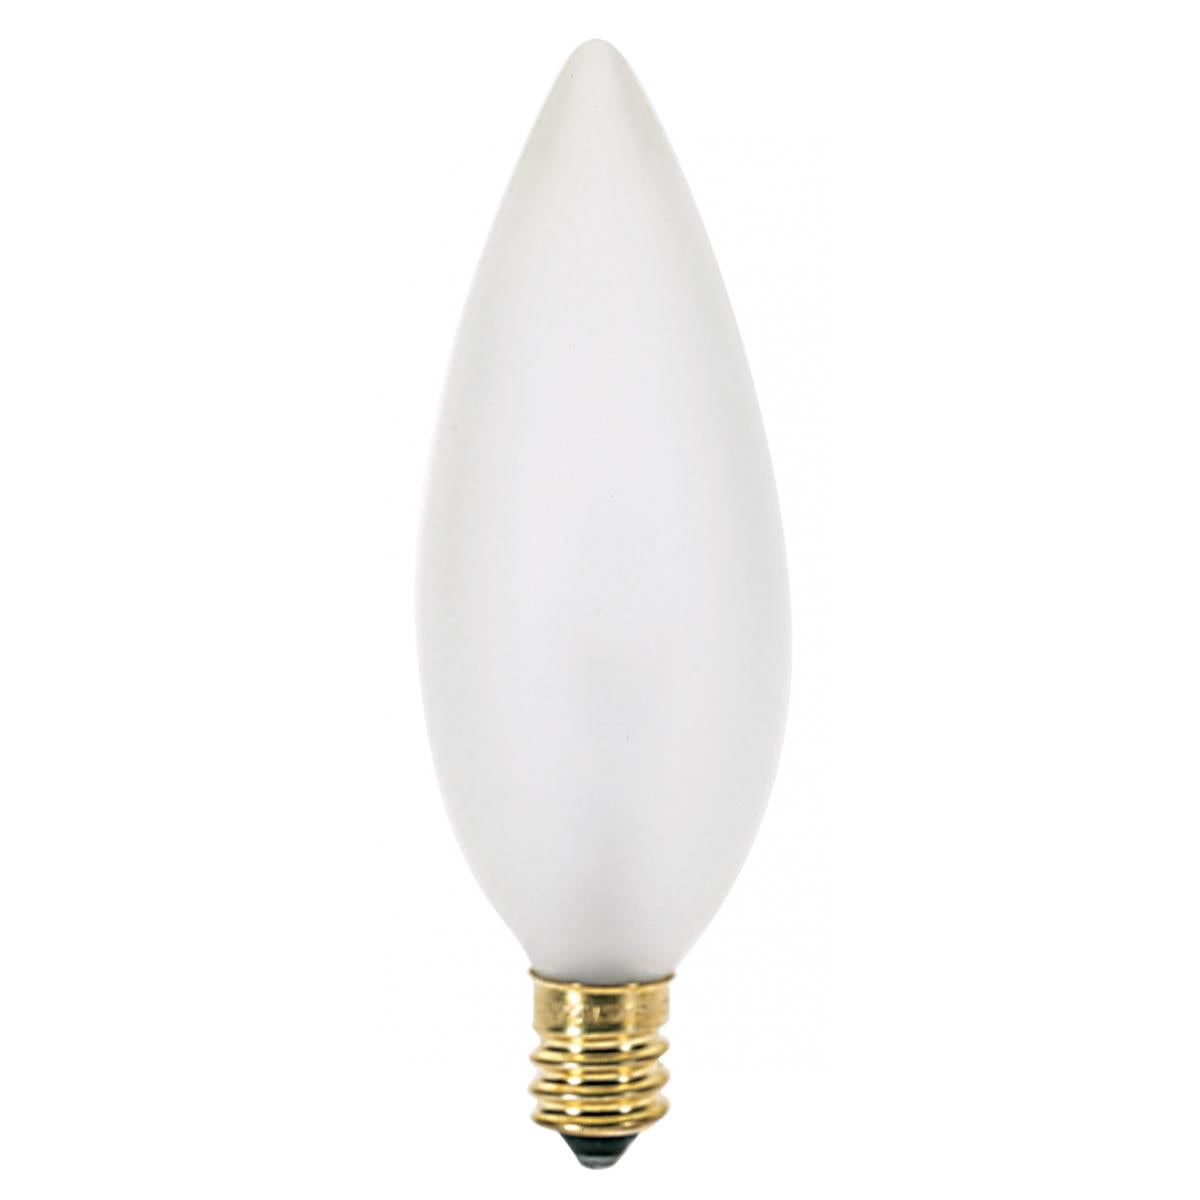 Replacement for Satco S3786 40W TORP CAND FR 40 watt BA9 1/2 Frost Incandescent E12 Candelabra - NOW LED S21824